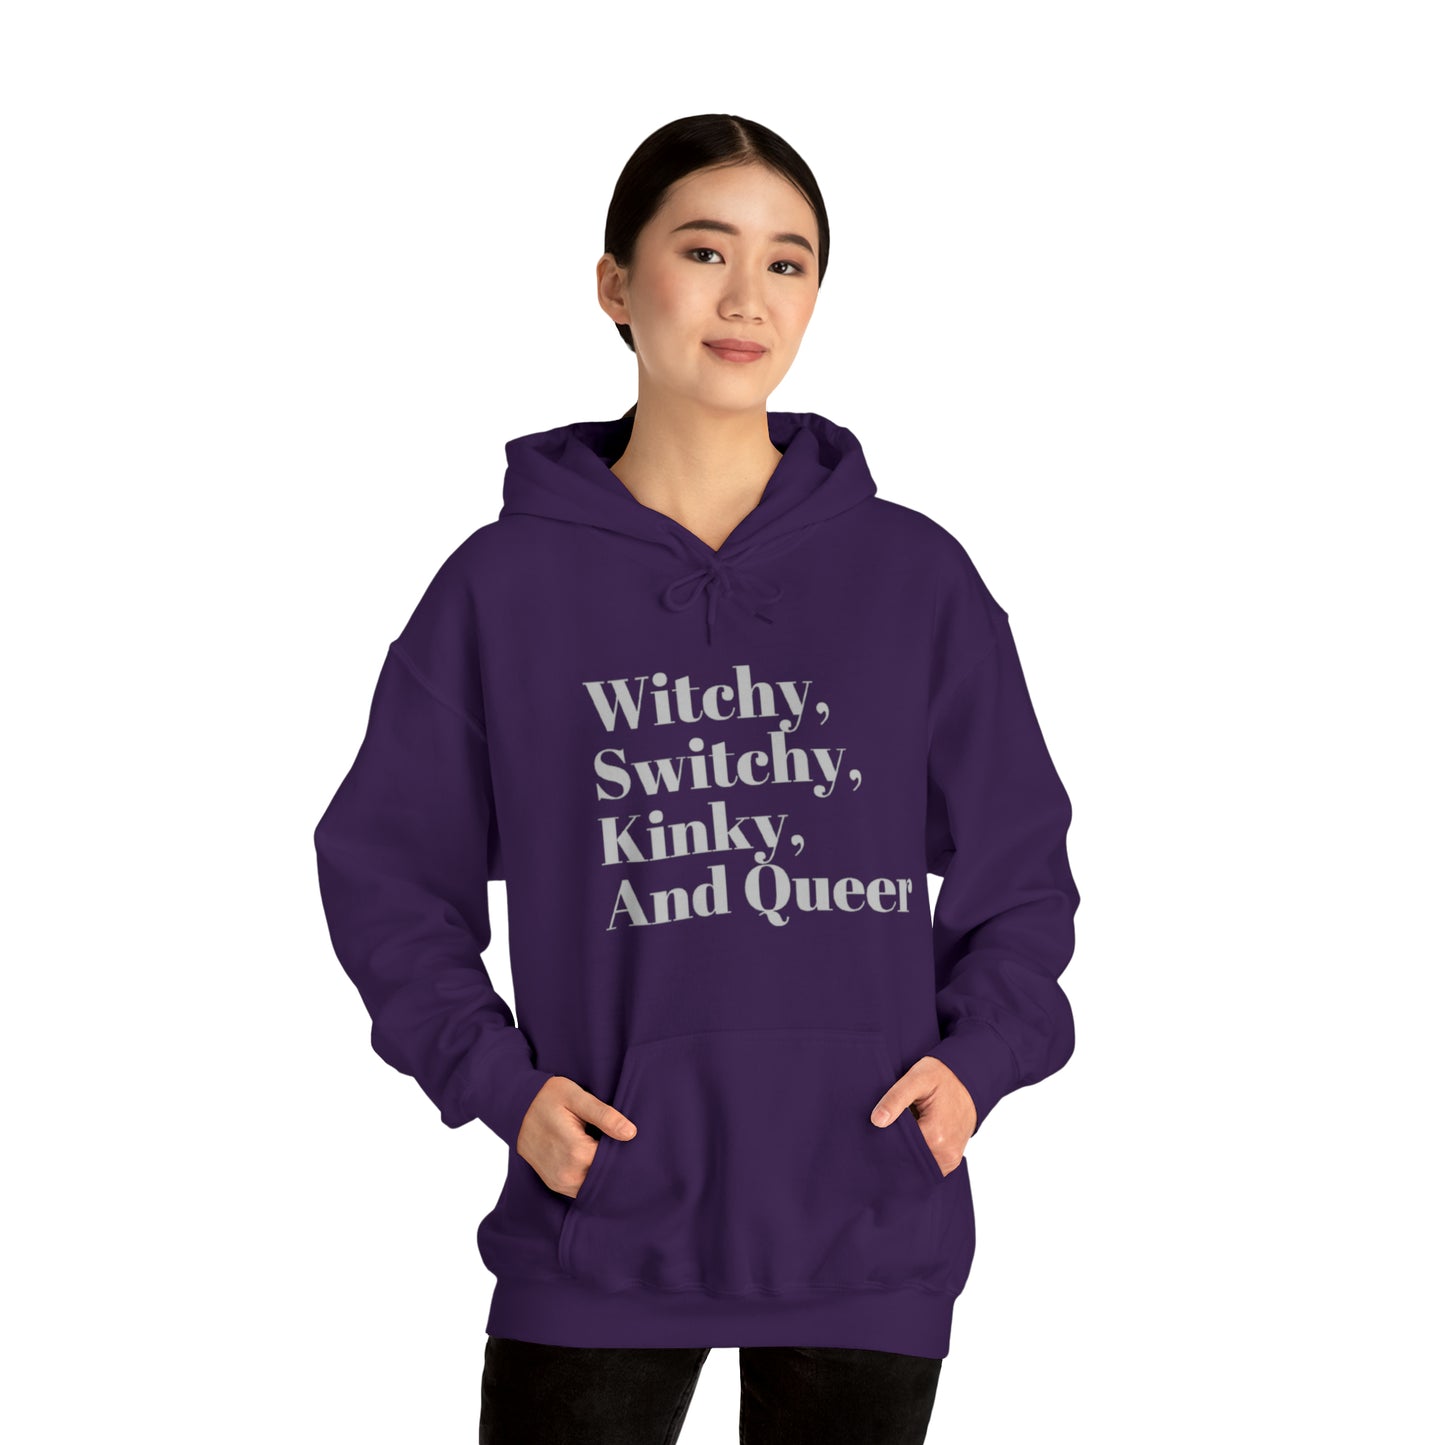 Witchy, Switchy, Kinky, and Queer Unisex Hooded Sweatshirt